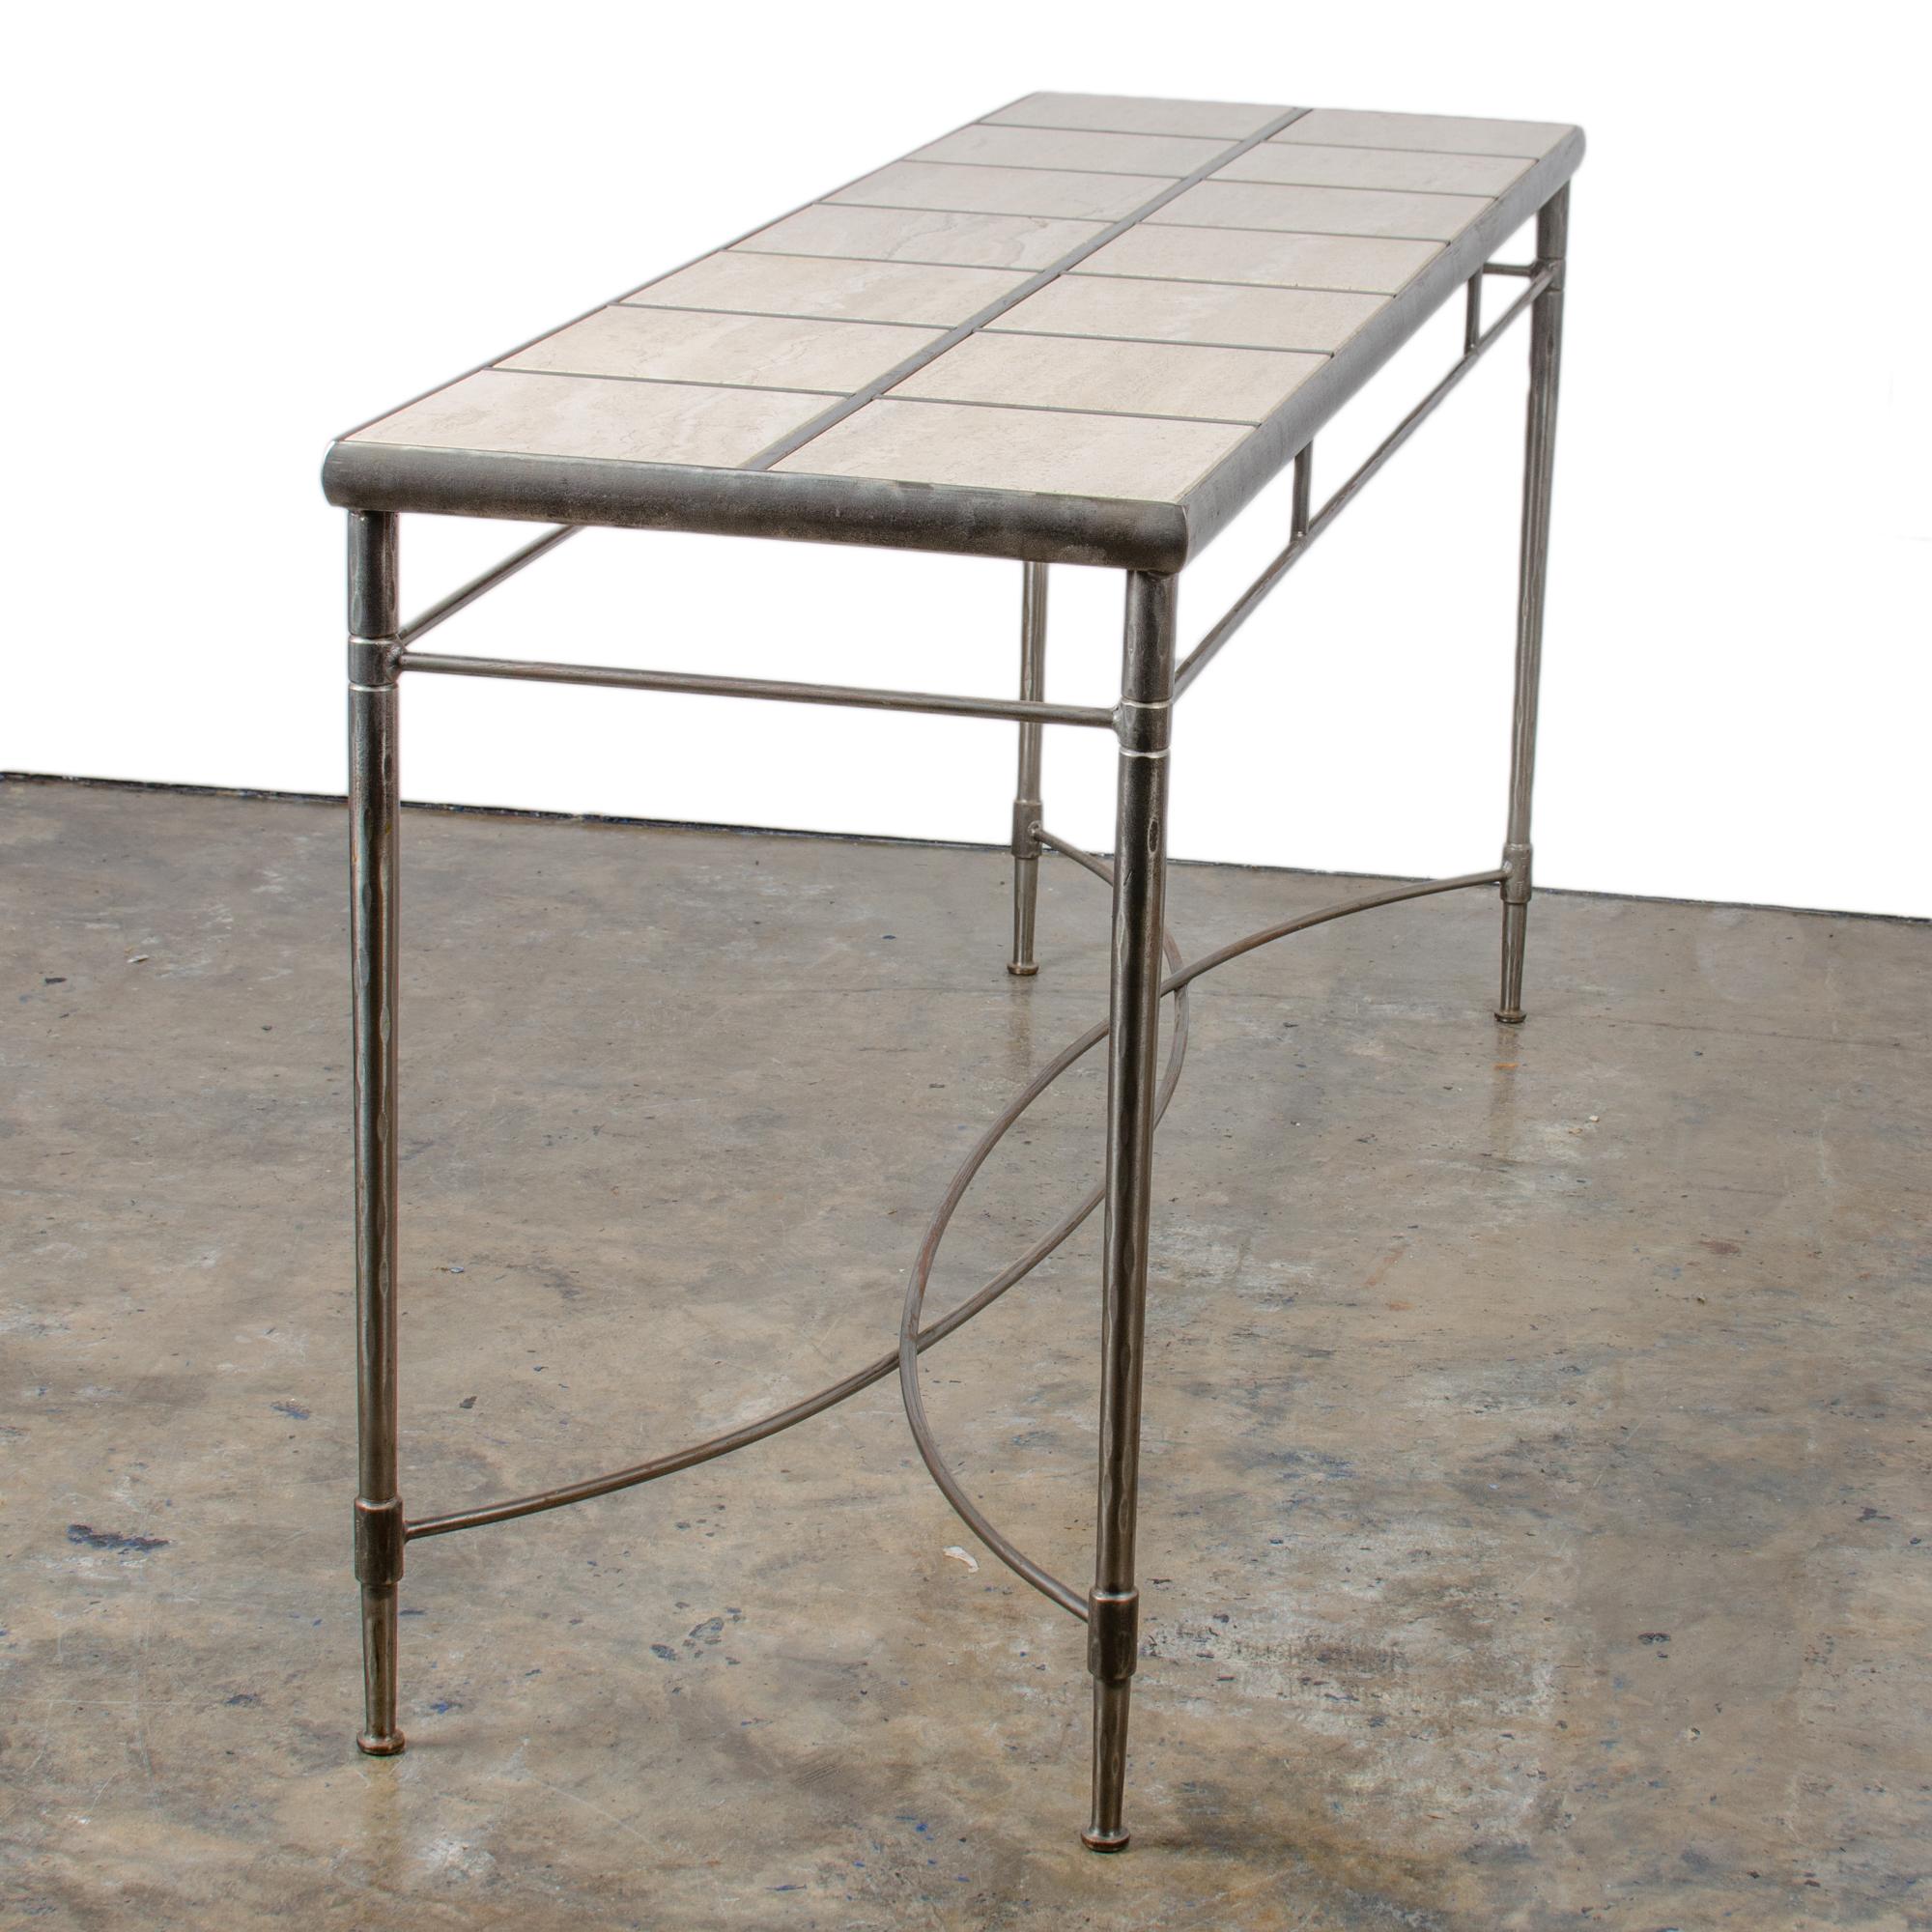 Italian Iron and Travertine Tile Console Table Regular price For Sale 4